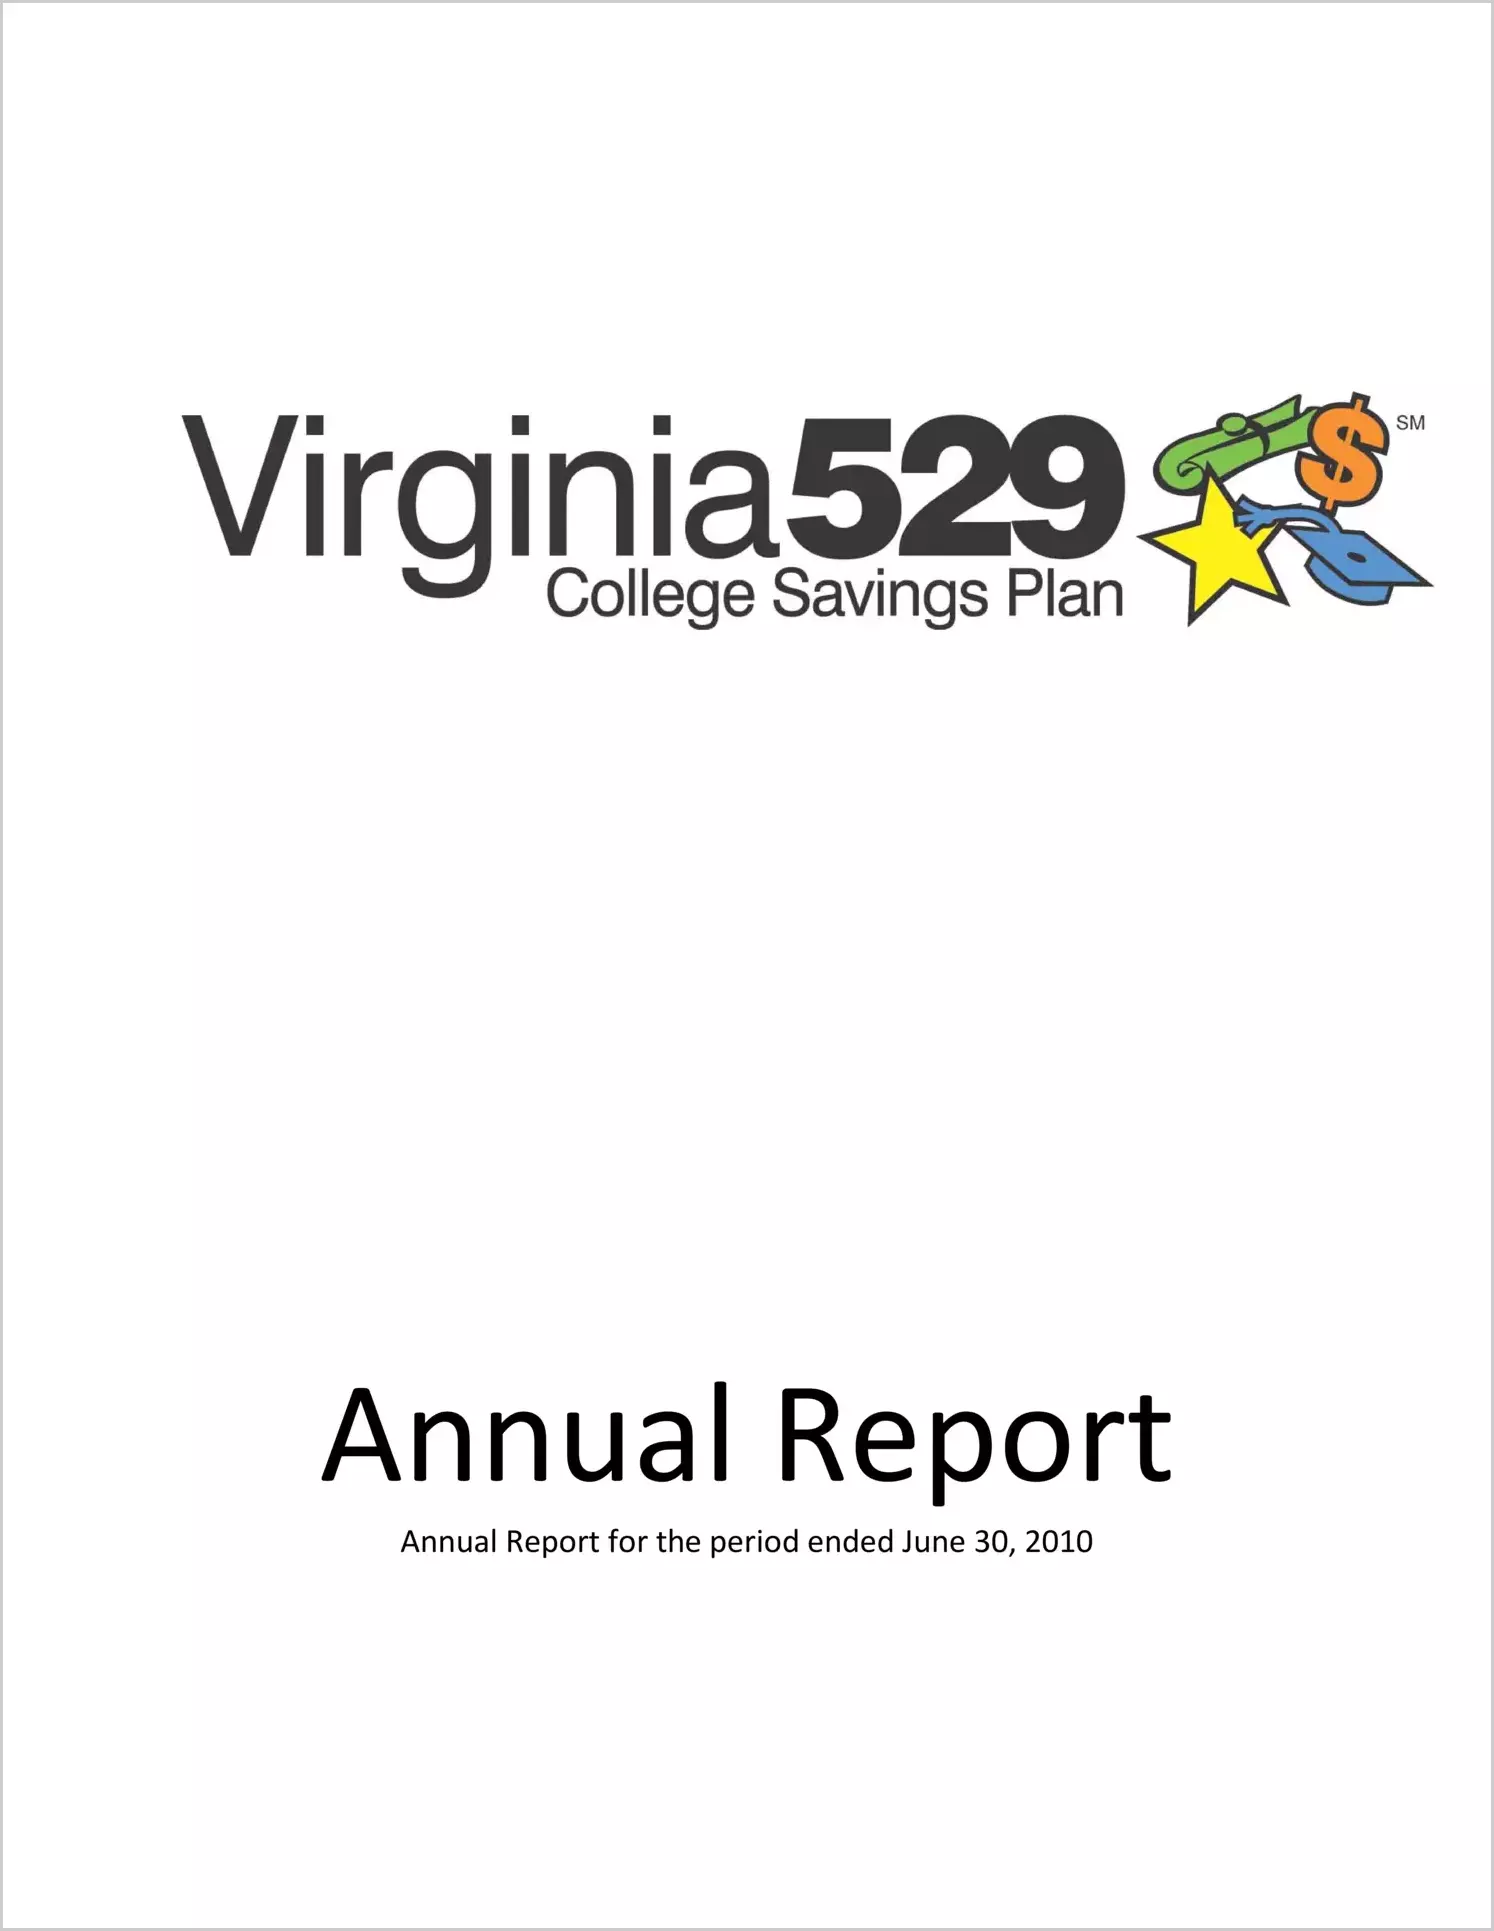 Virginia College Savings Plan for the year ended June 30, 2010